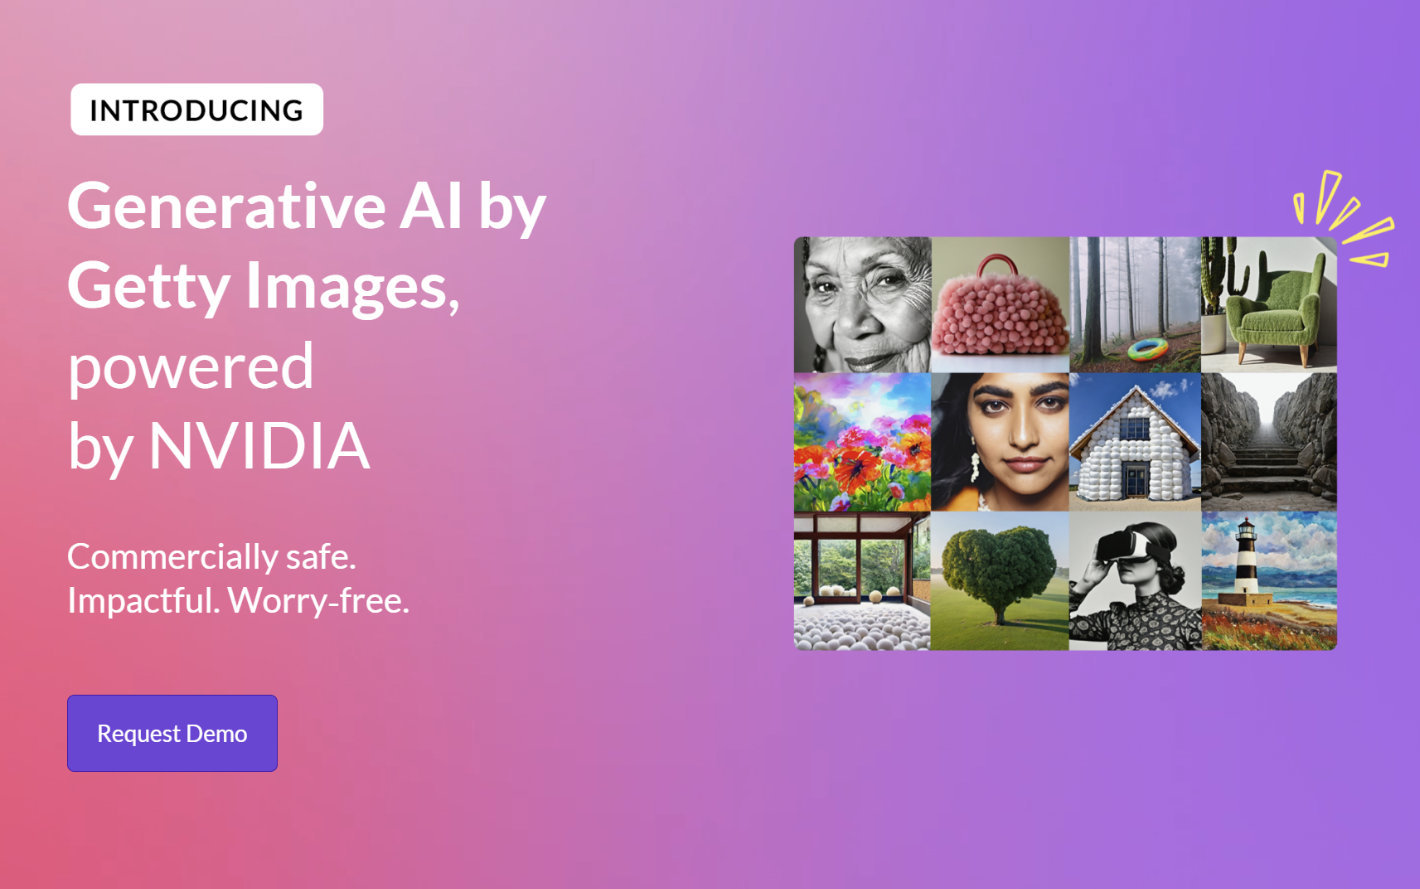 Getty Images says no to Firefly, launches Generative AI service